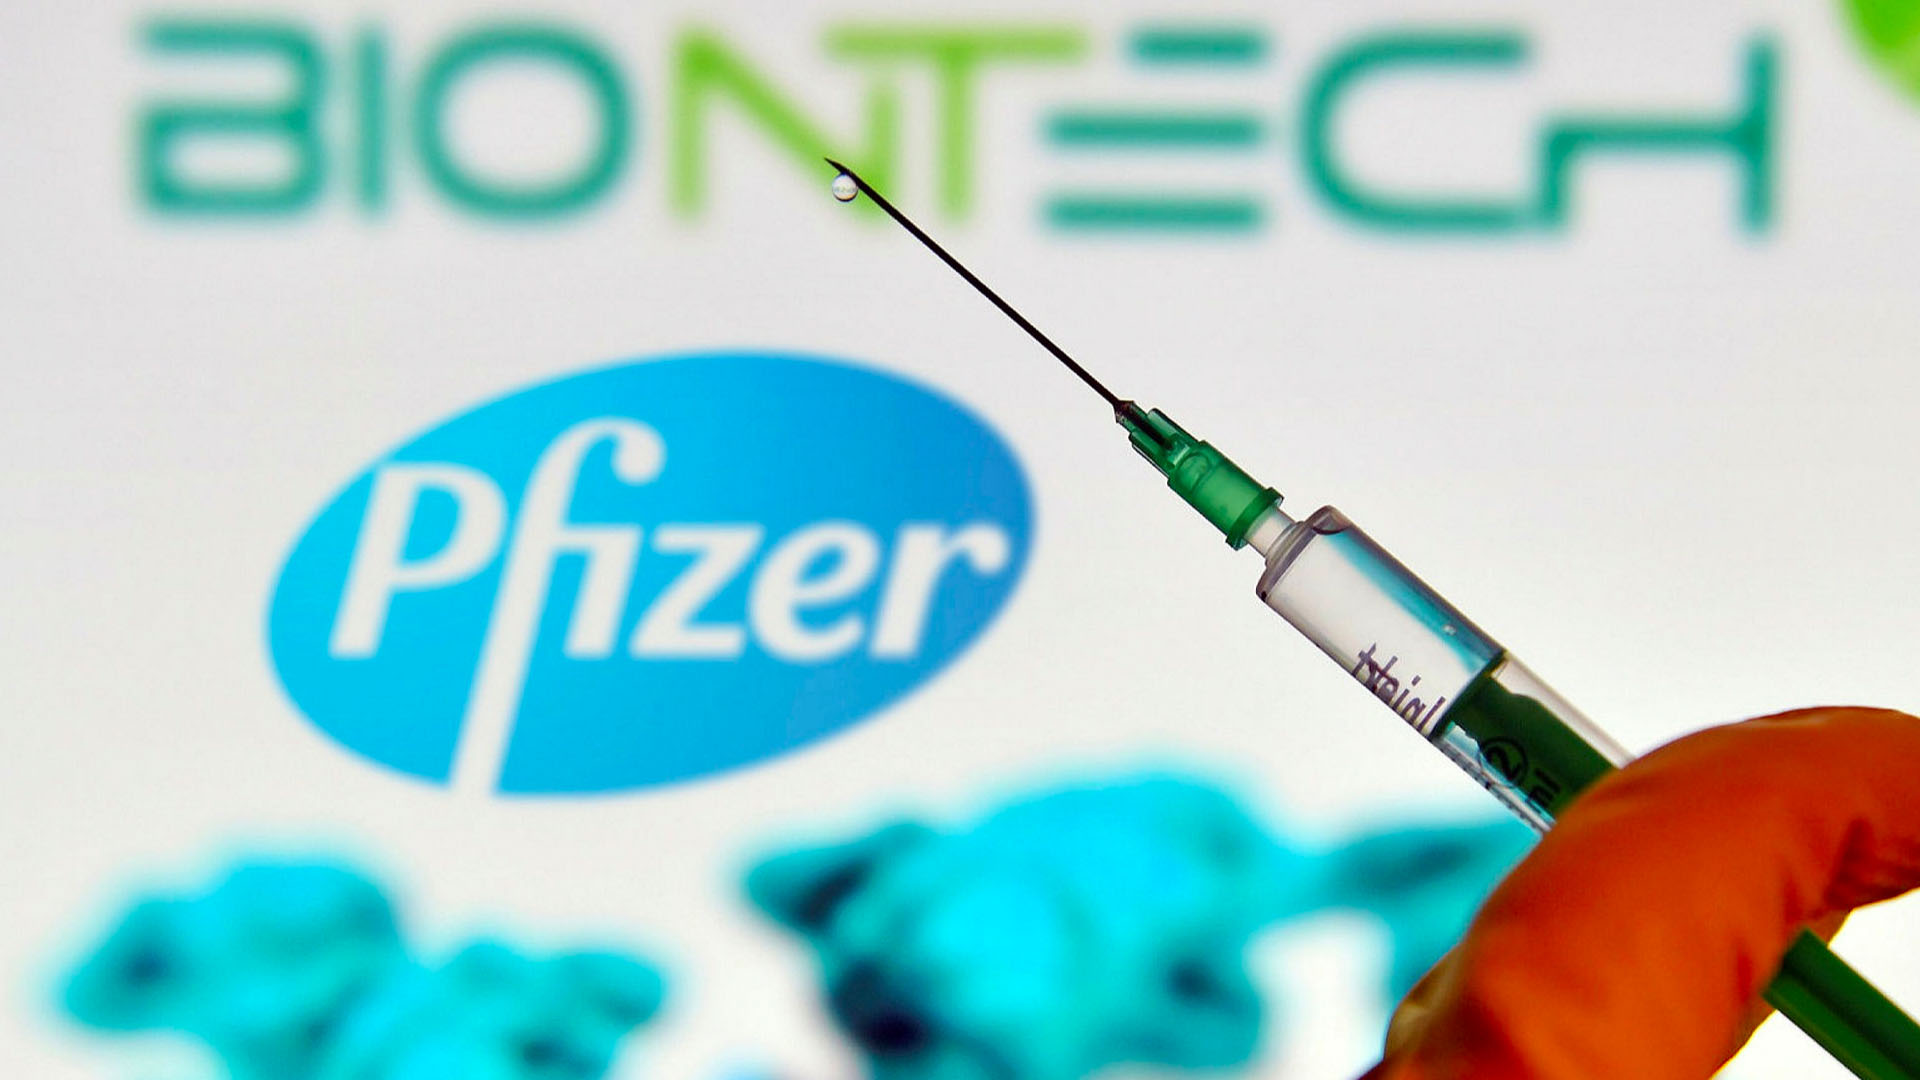 Two Pfizer COVID-19 vaccine doses grant 95% protection against the virus